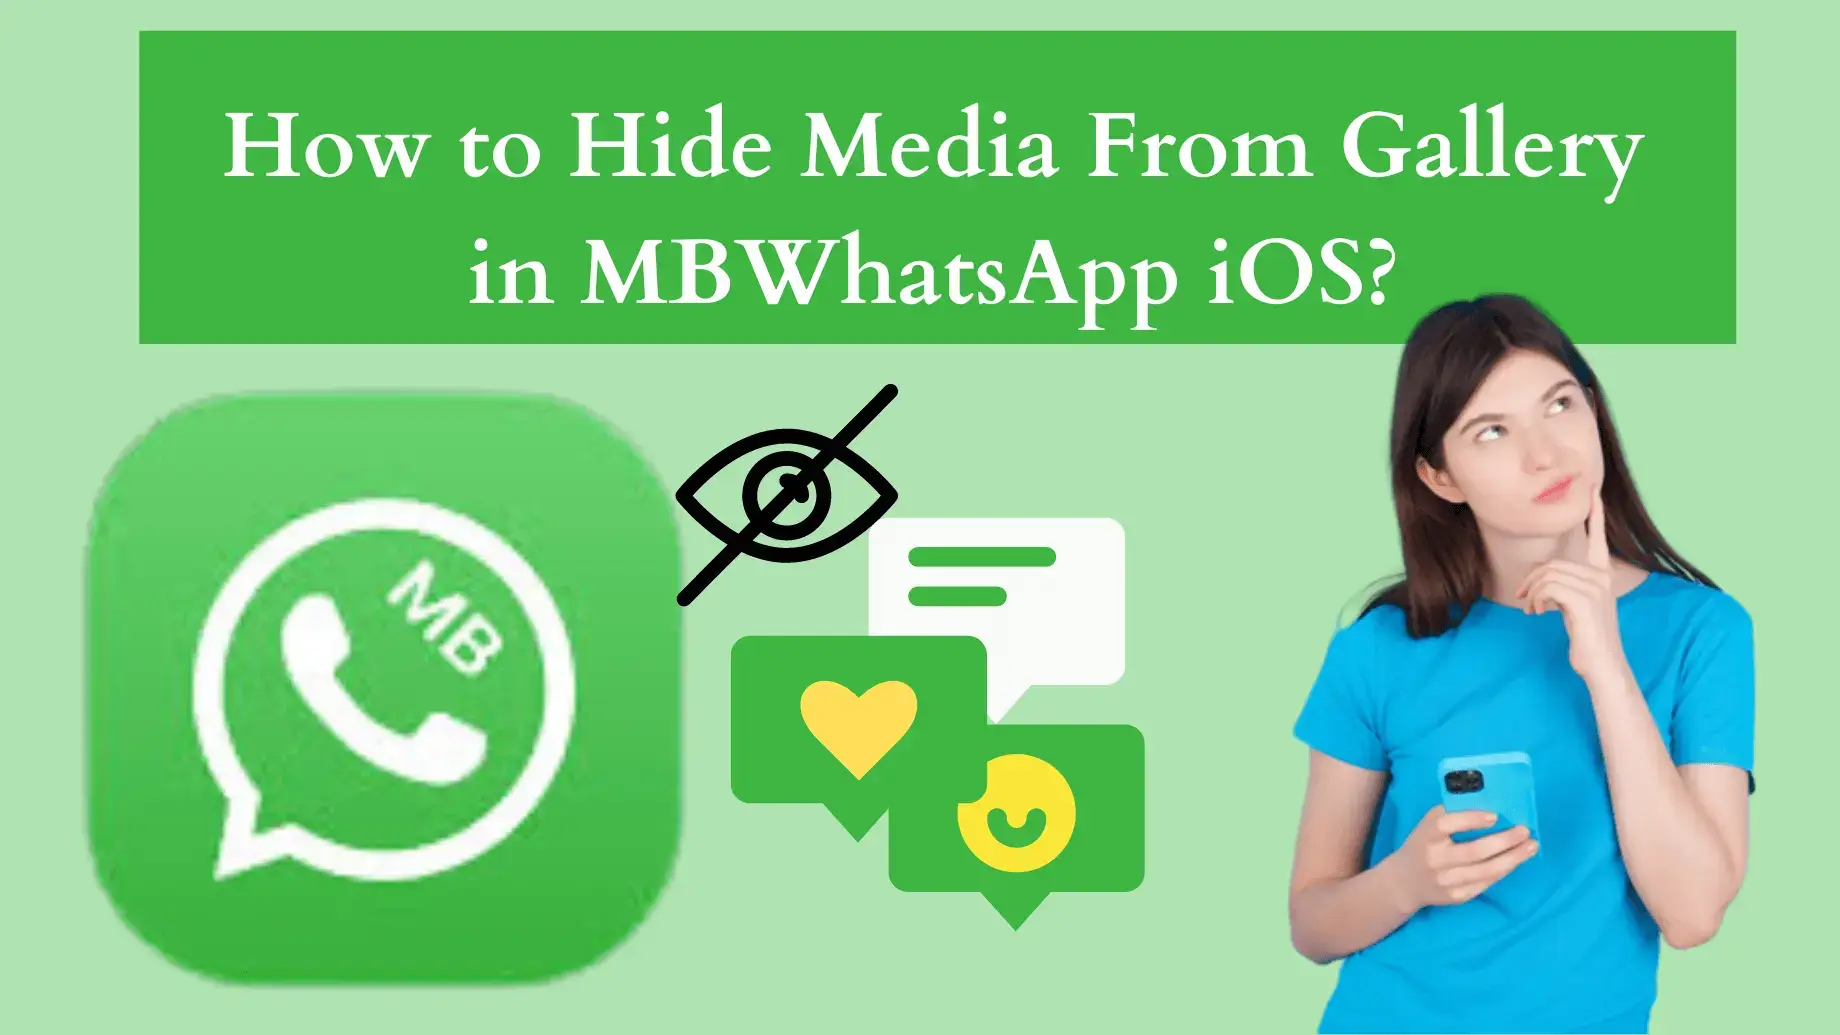 How to hide Media From Gallery in MB WhatsApp